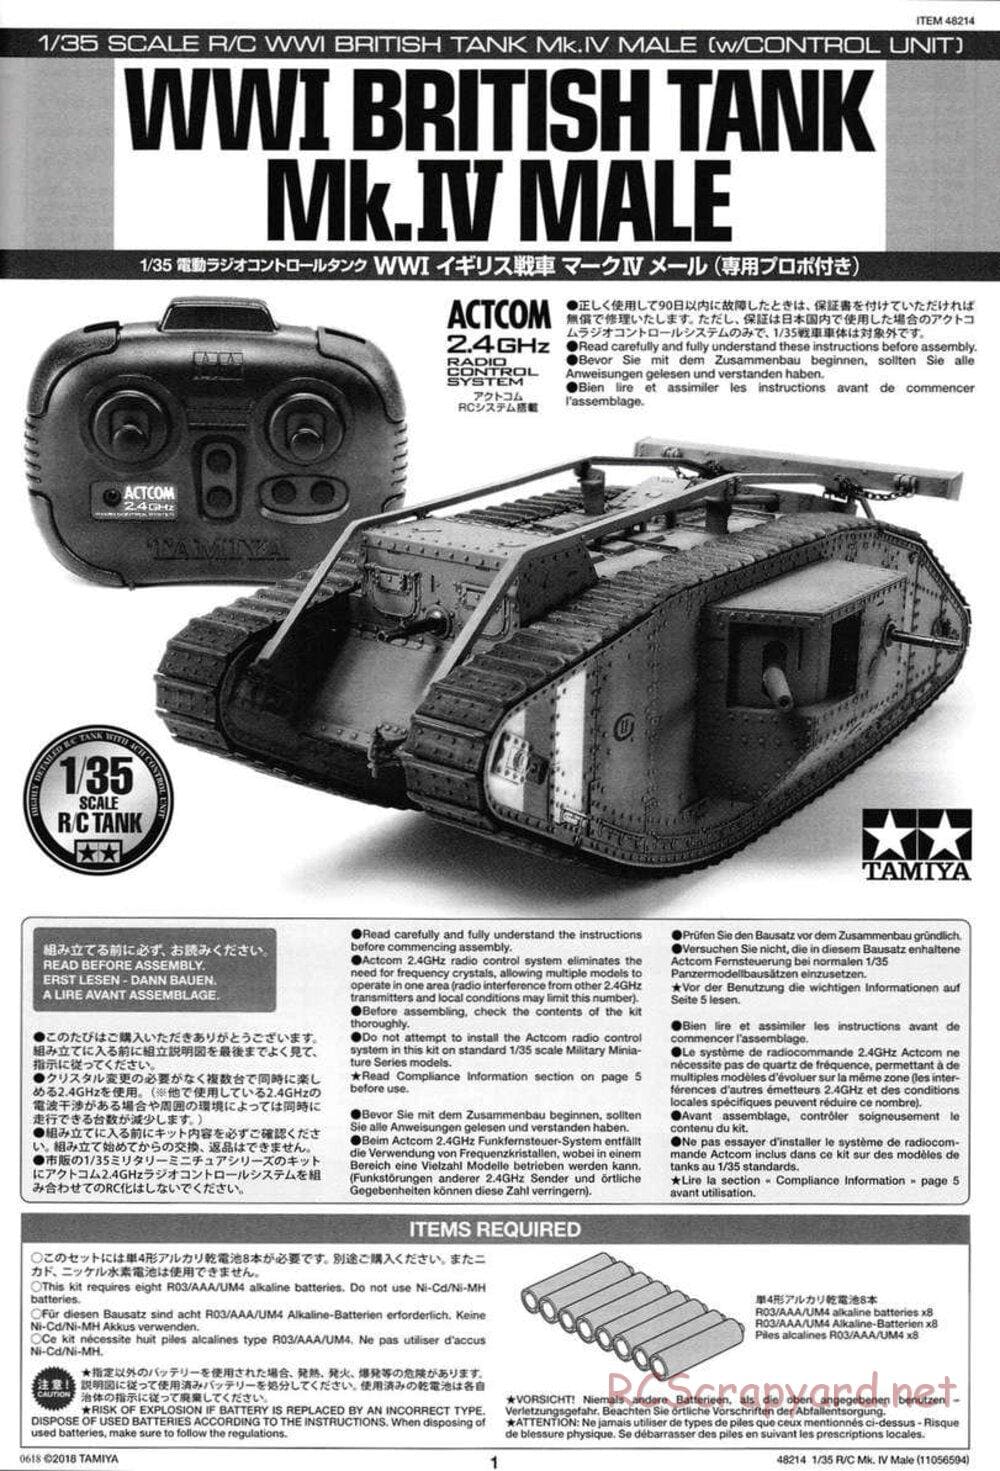 Tamiya - WWI British Tank Mark IV Male - 1/35 Scale Chassis - Manual - Page 1